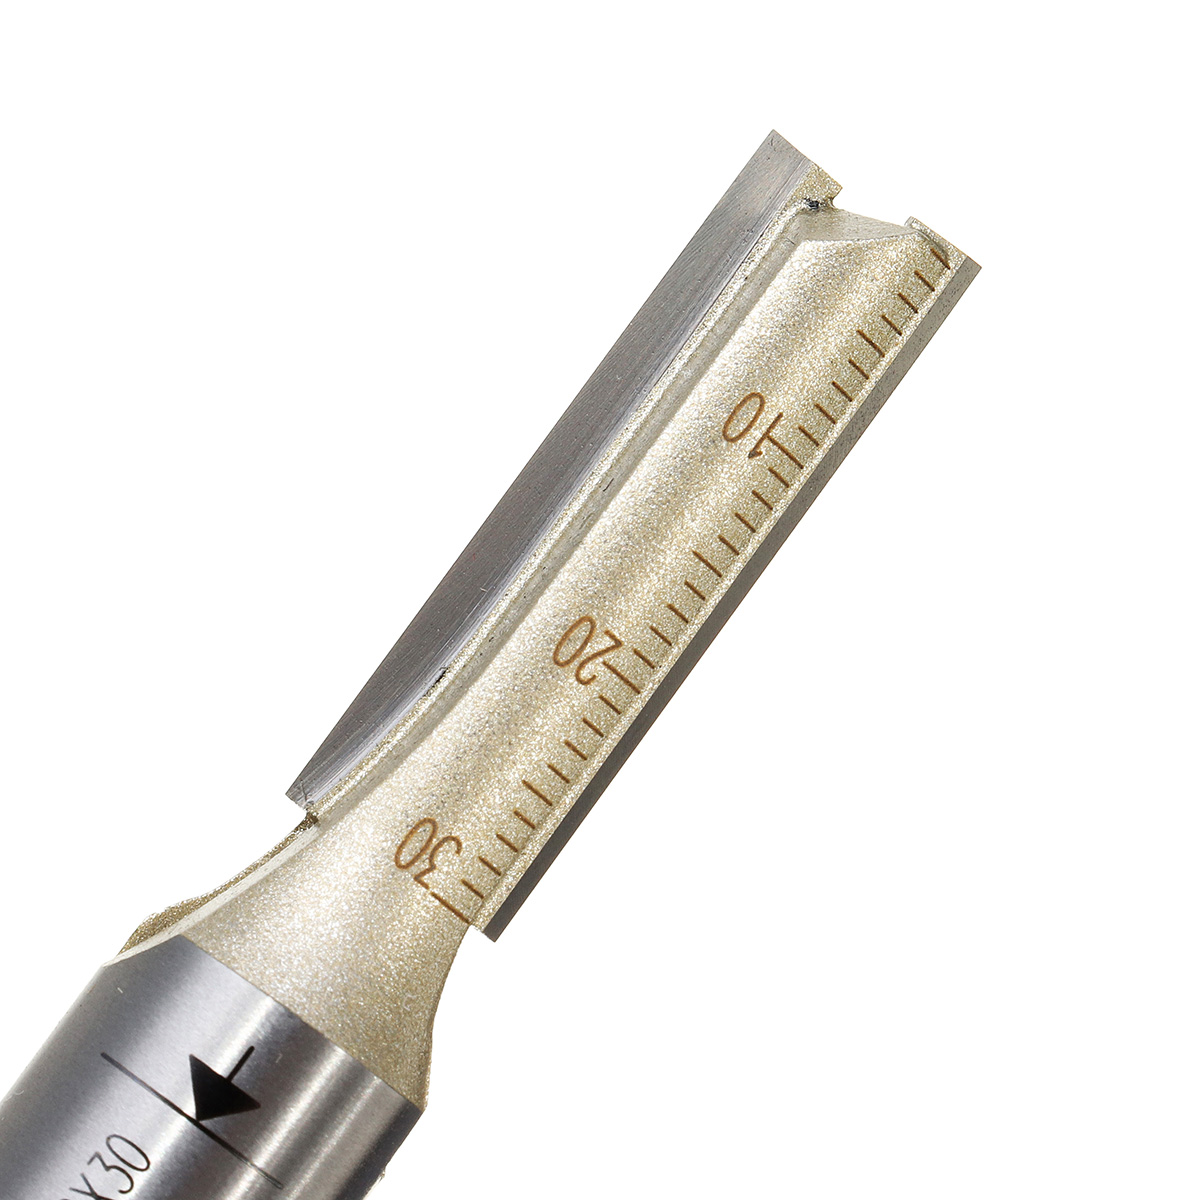 12-Inch-Straight-Shank-Double-Flute-Router-Bit-1214-1238-1212-Slot-Cutter-1385393-5